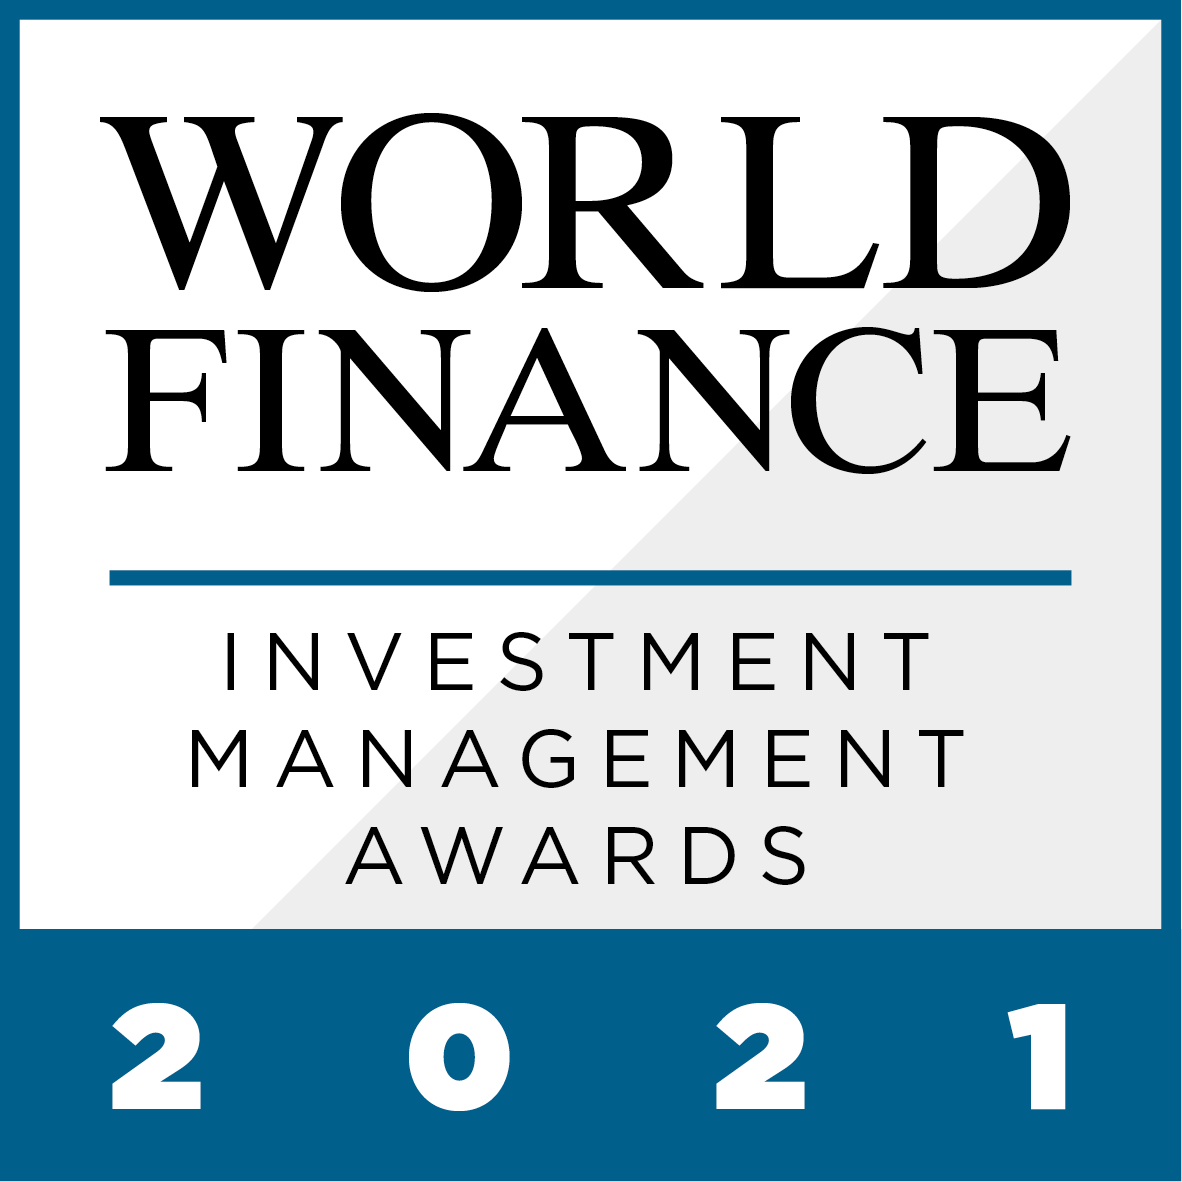 Please see below the full list of the Investment Management Awards 2021, as awarded by World Finance magazine